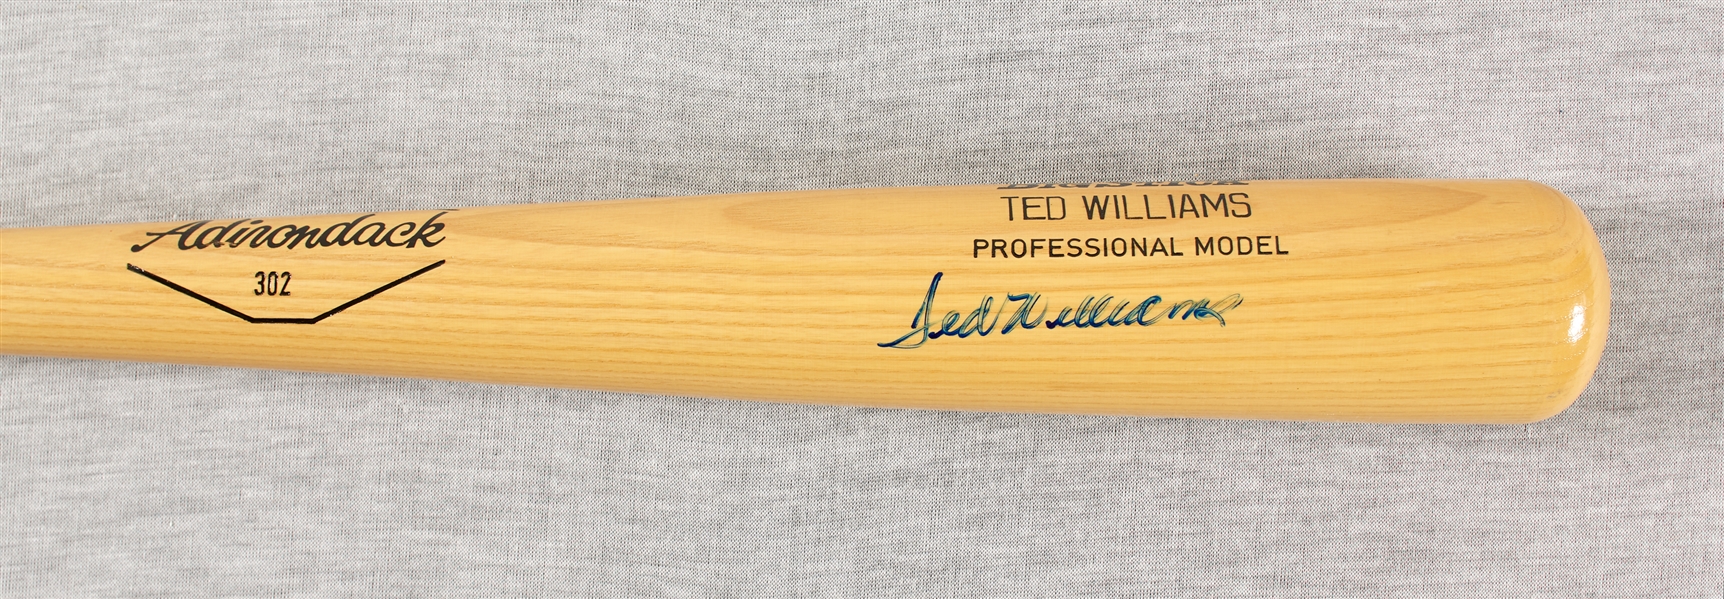 Ted Williams Signed Rawlings Bat (PSA/DNA)